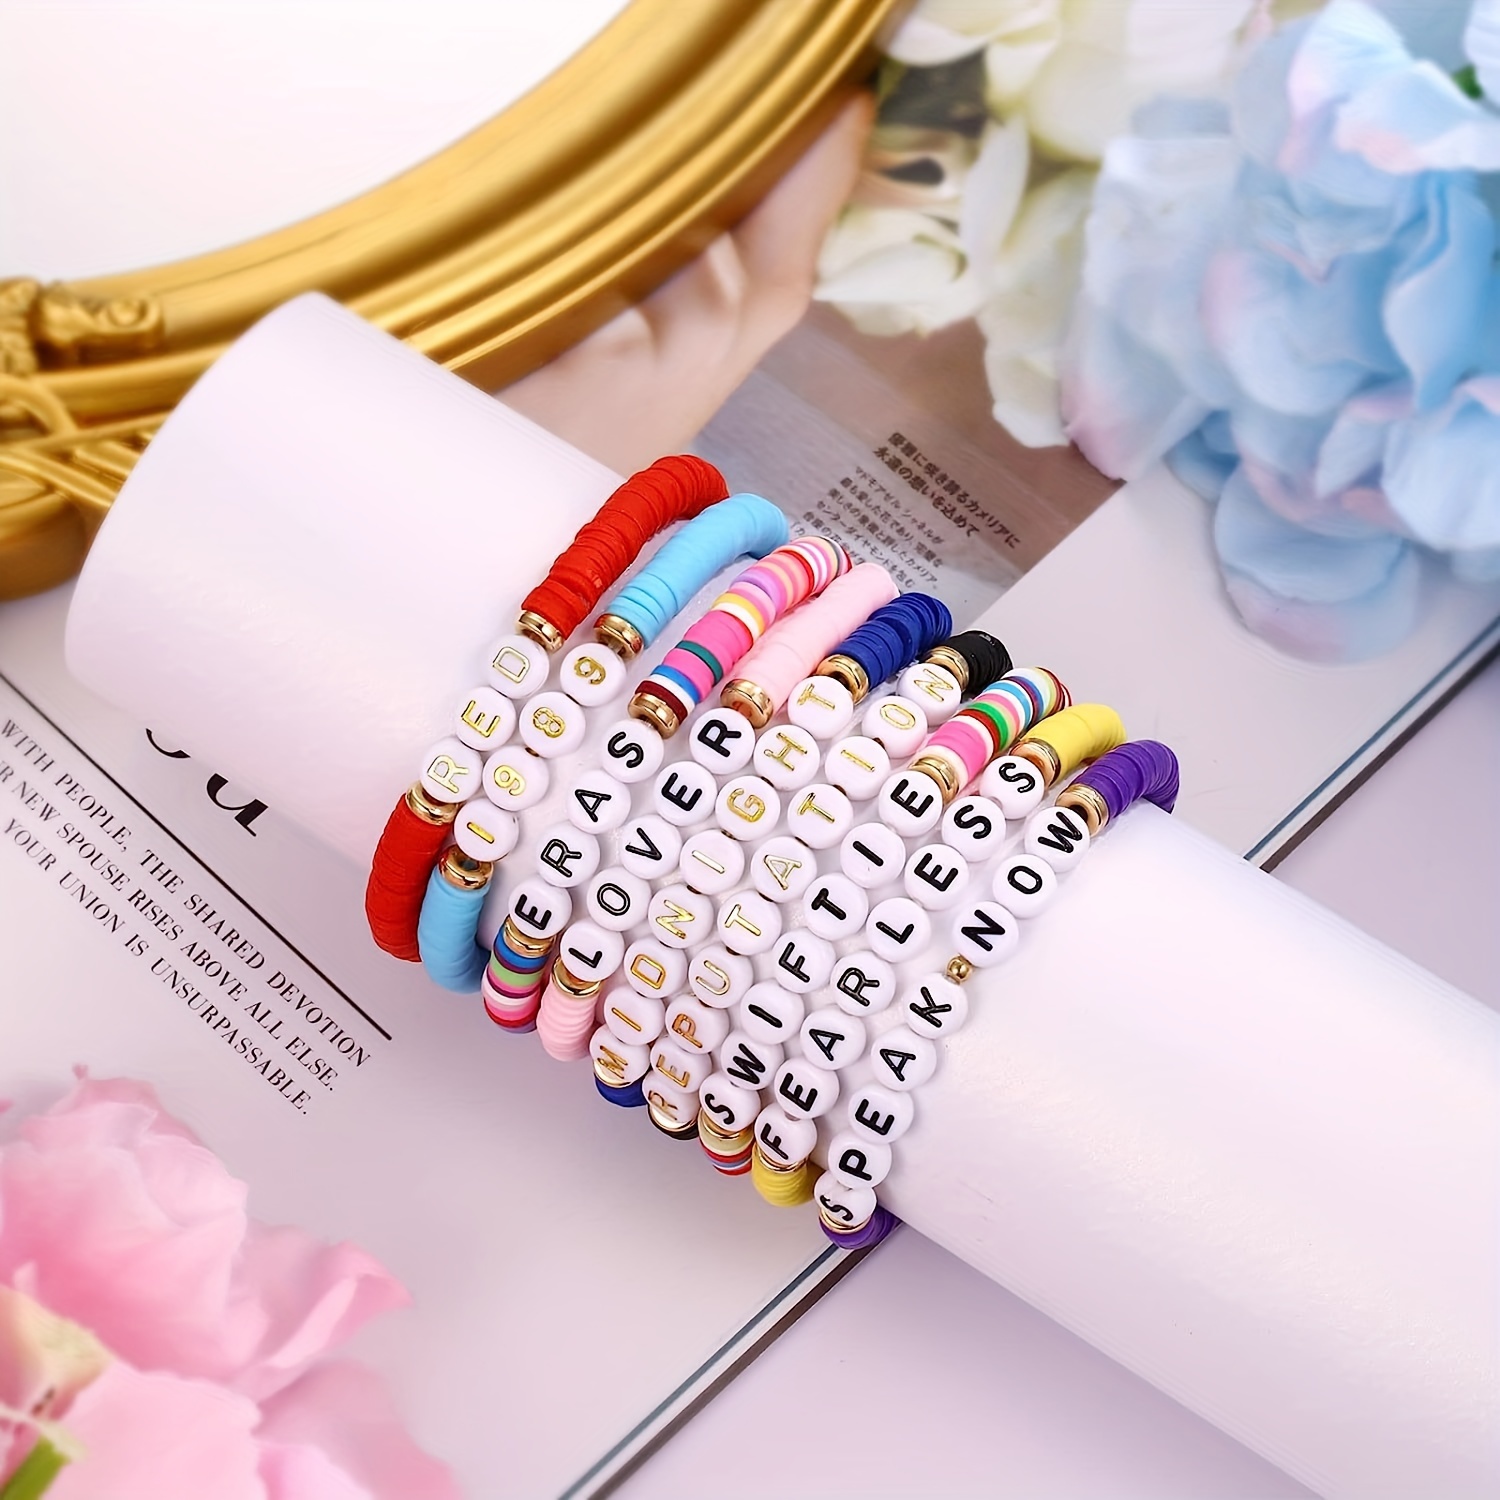 

Ts Fan 9-piece Stackable Bracelet Set - Boho & Minimalist Style, Colorful Polymer Clay Letter Beads, Music-inspired Friendship Wristbands For Parties & Festivals